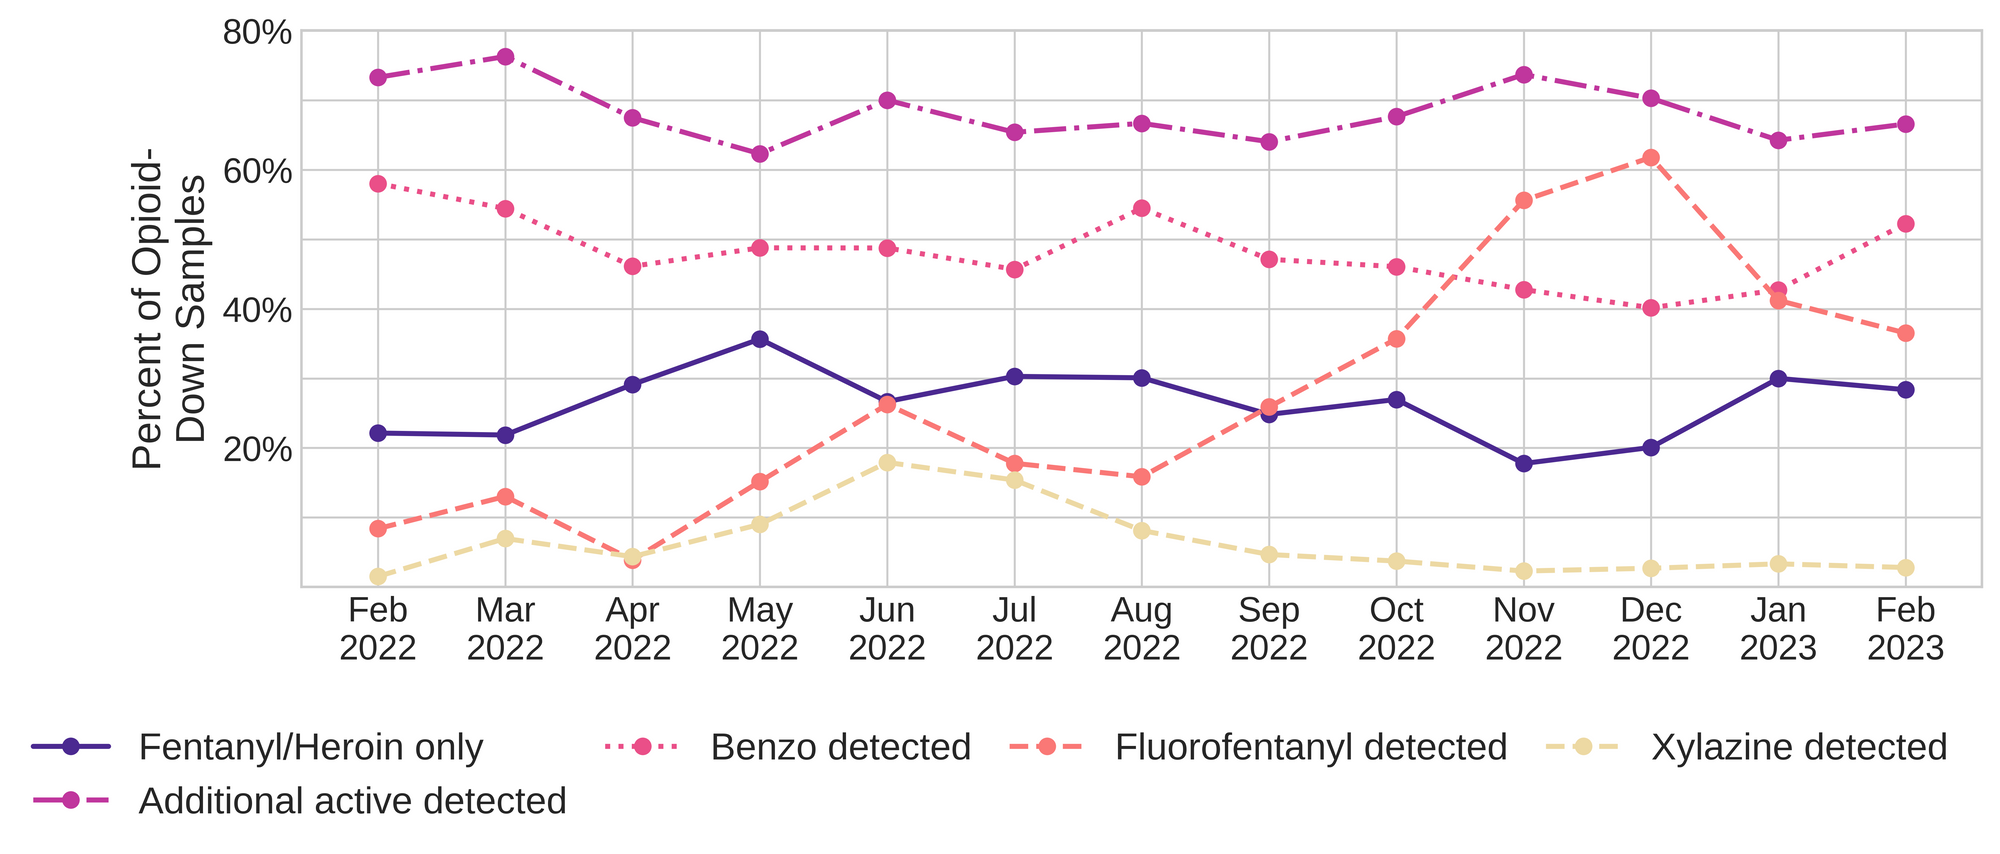 Figure 3. The percentage of expected opioid-down samples checked between February 2022 and February 2023 that only contained fentanyl/heroin actives (solid dark purple), opioid-down samples with an additional active detected (dot-dashed magenta), opioid-down samples that contained a benzodiazepine-related drug (dotted pink), opioid-down samples that contained fluorofentanyl (dashed salmon), and opioid-down samples that contained xylazine (dashed yellow).